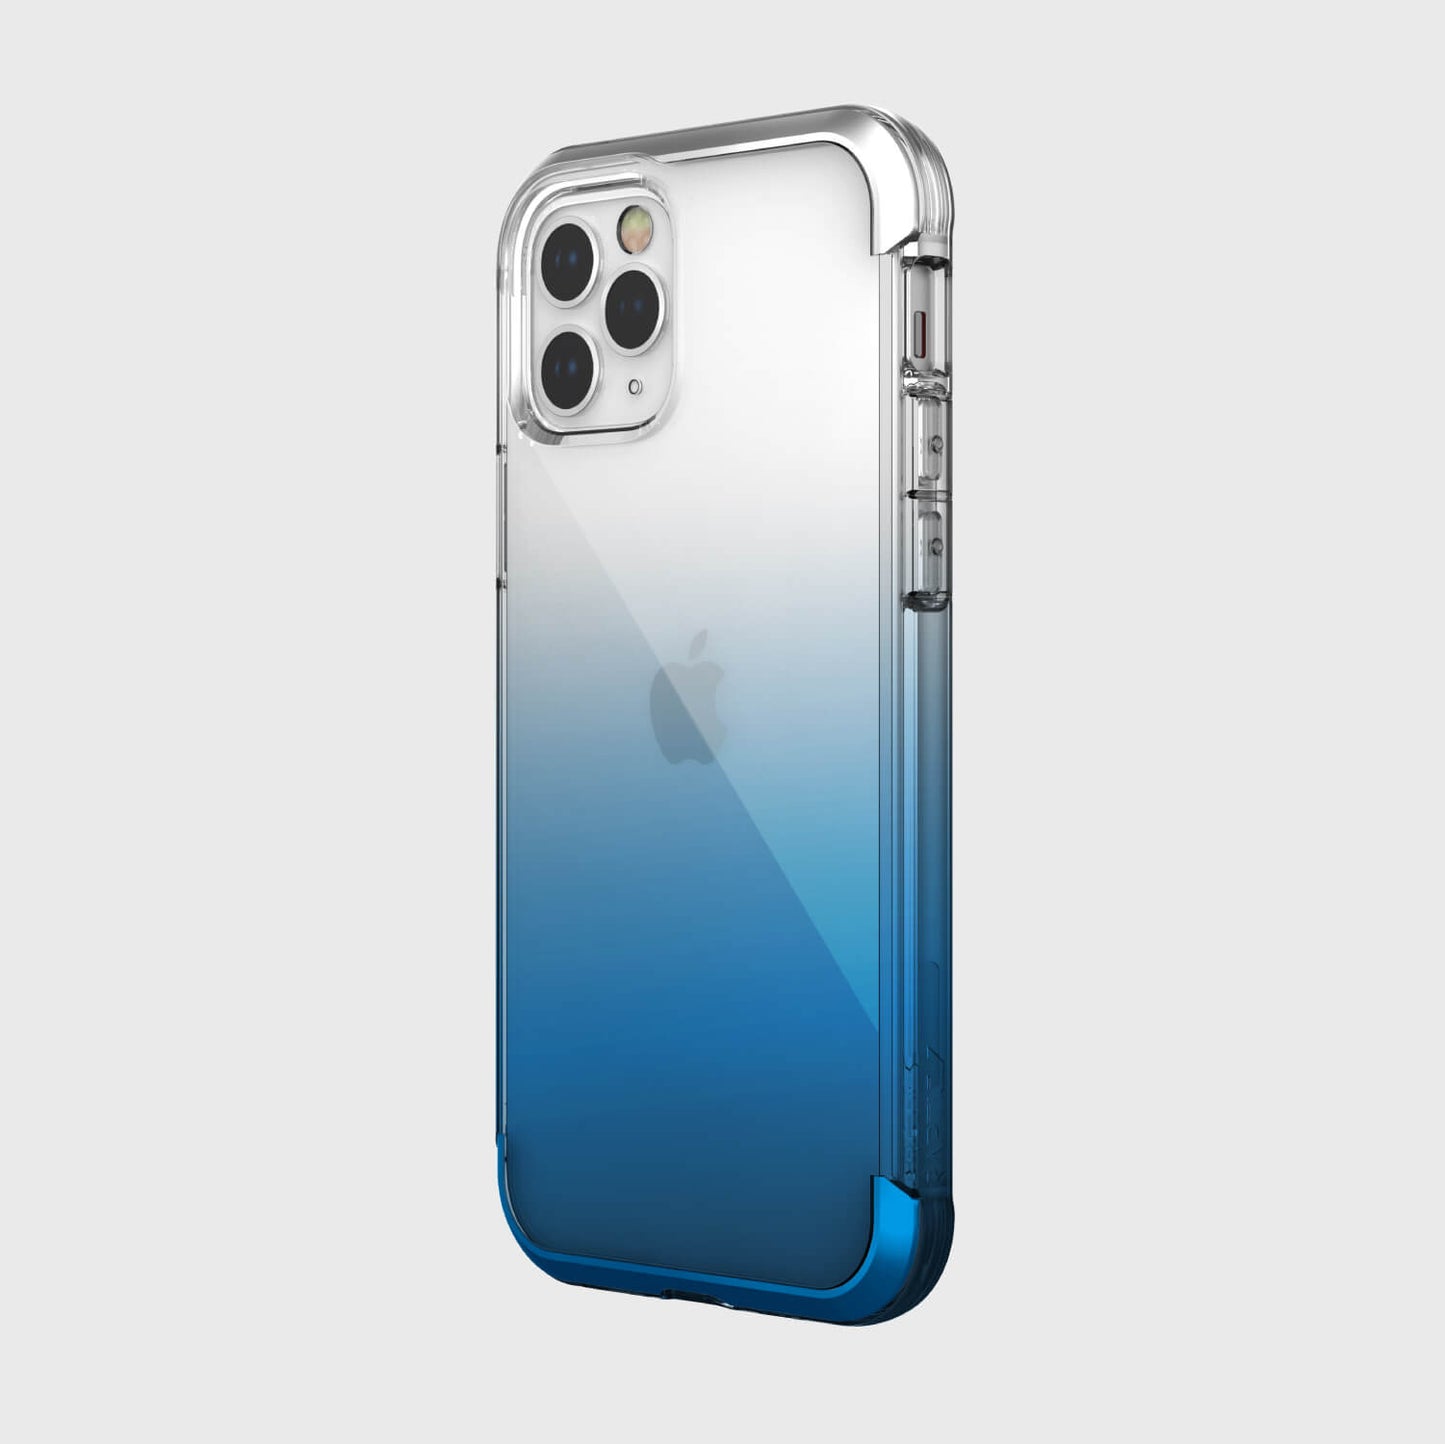 Showing a iPhone 12 Pro in a blue gradient Raptic Air case